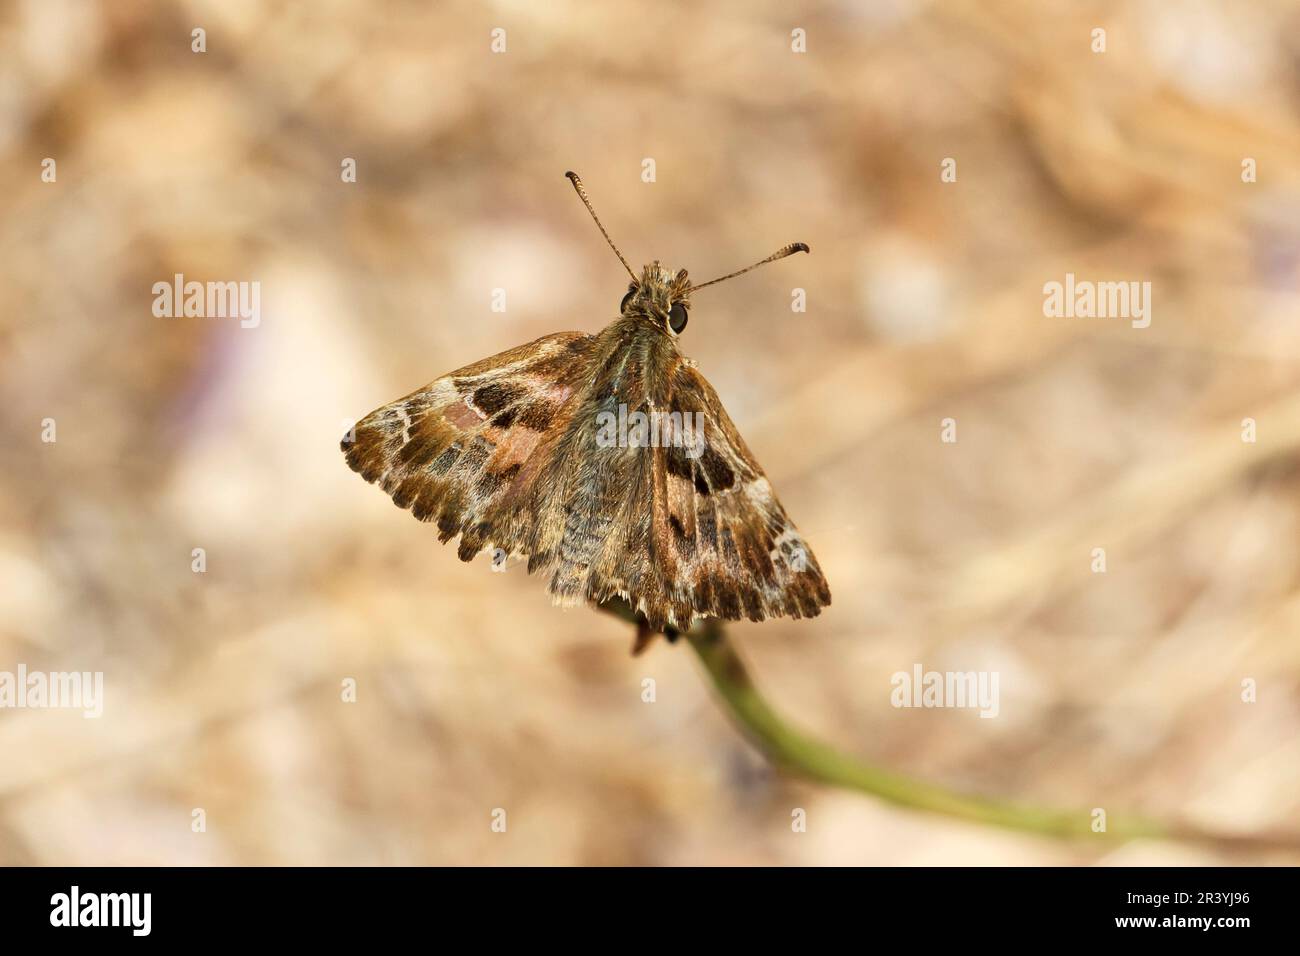 Carcharodus alceae, known as Mallow skipper butterfly Stock Photo